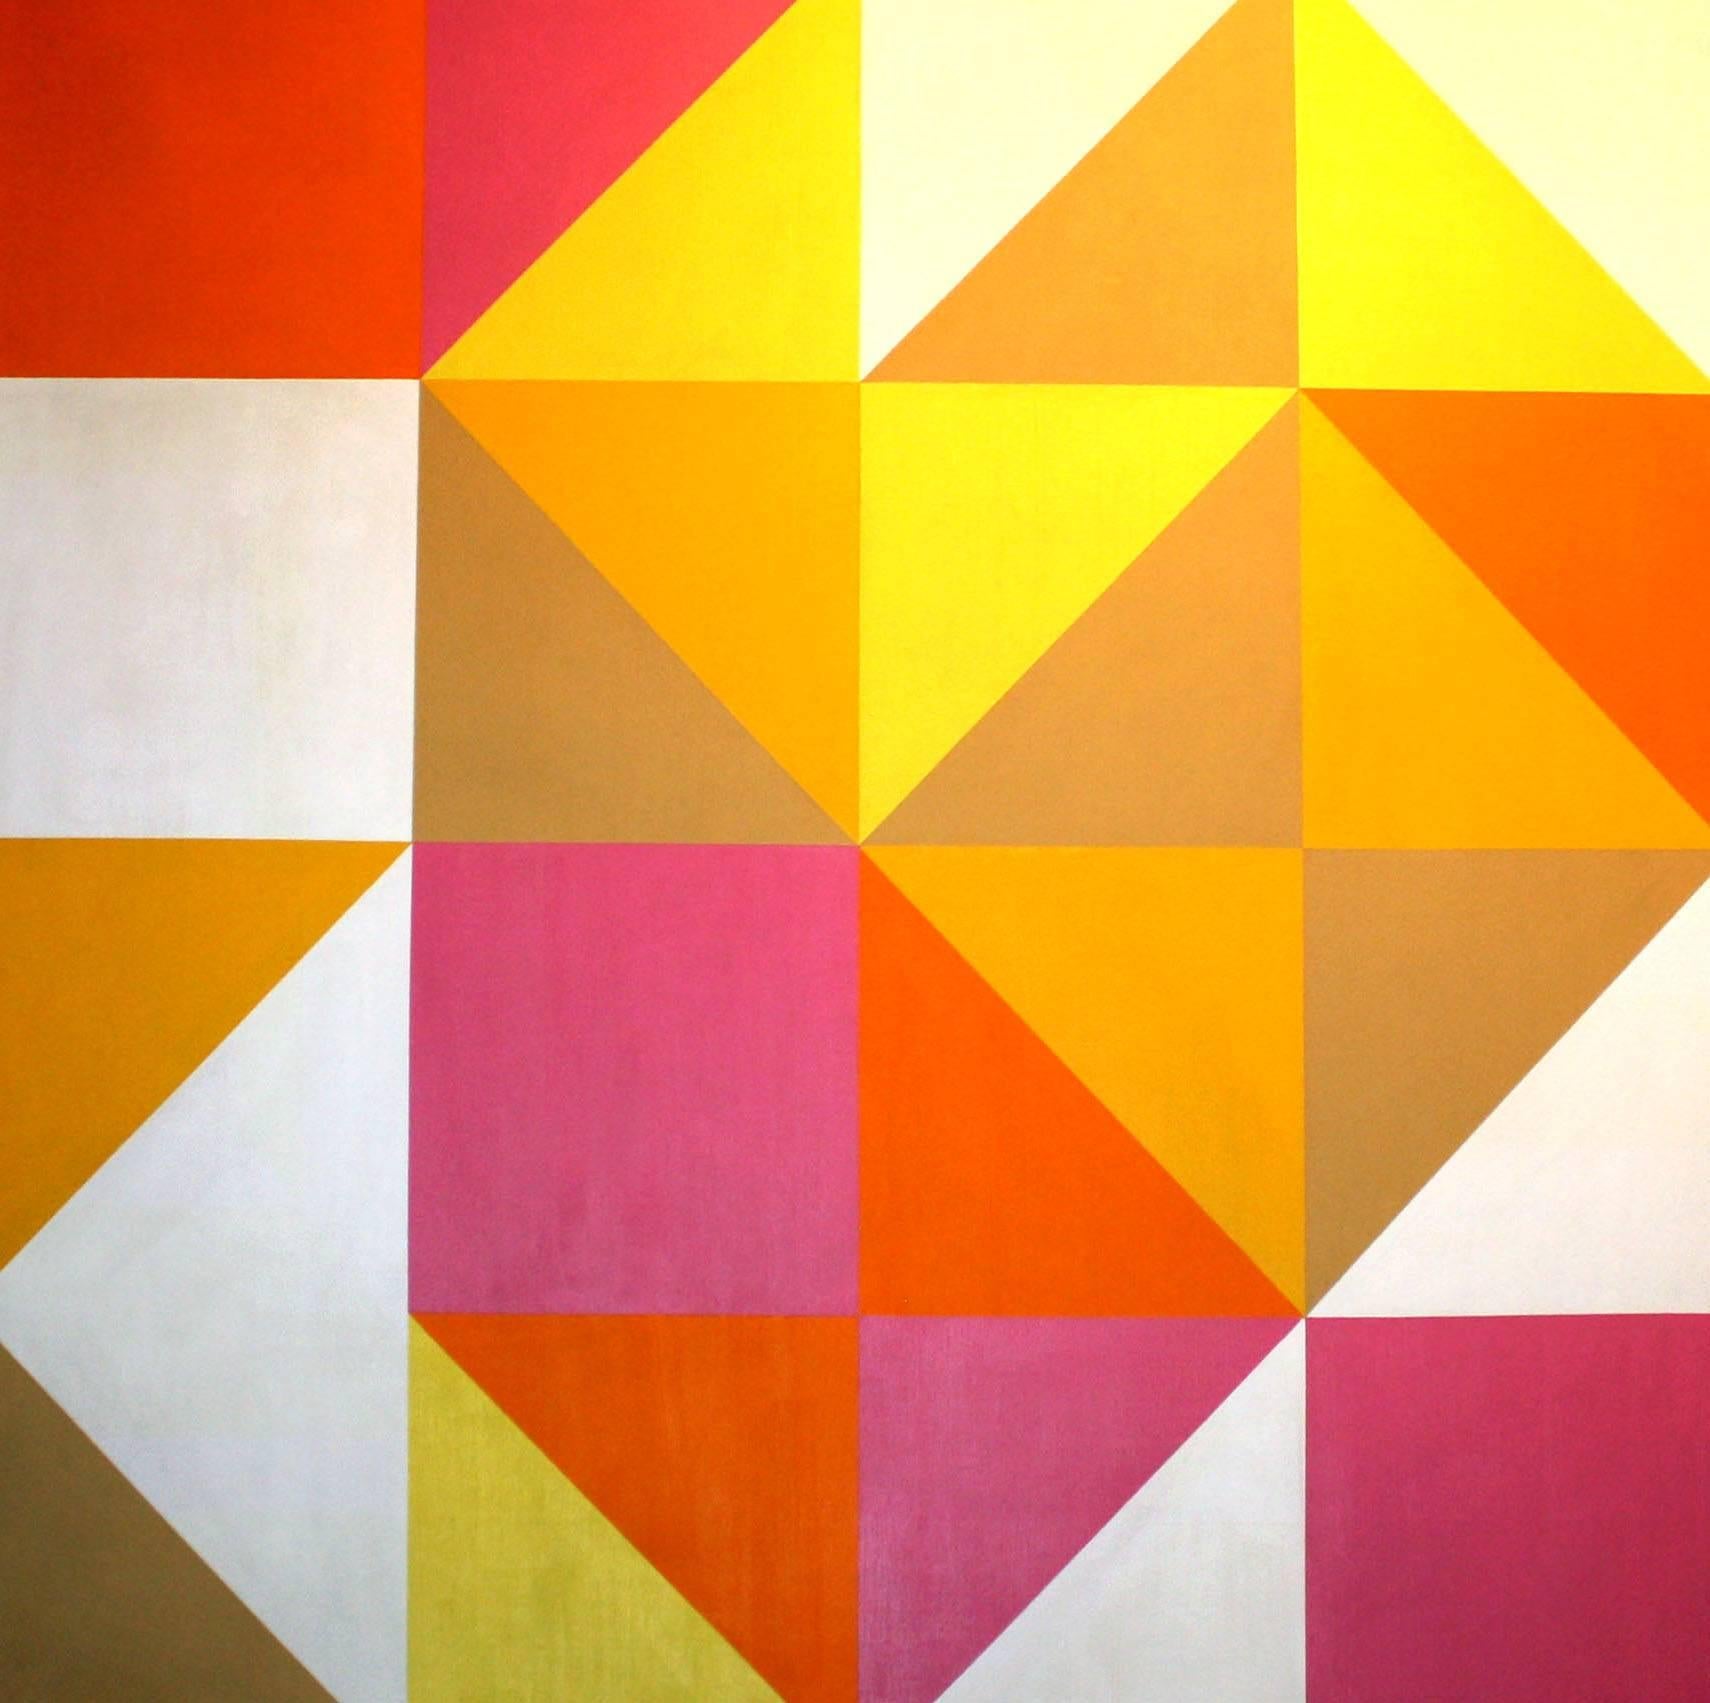 Abstract Painting James Koenig - Triangles chauds